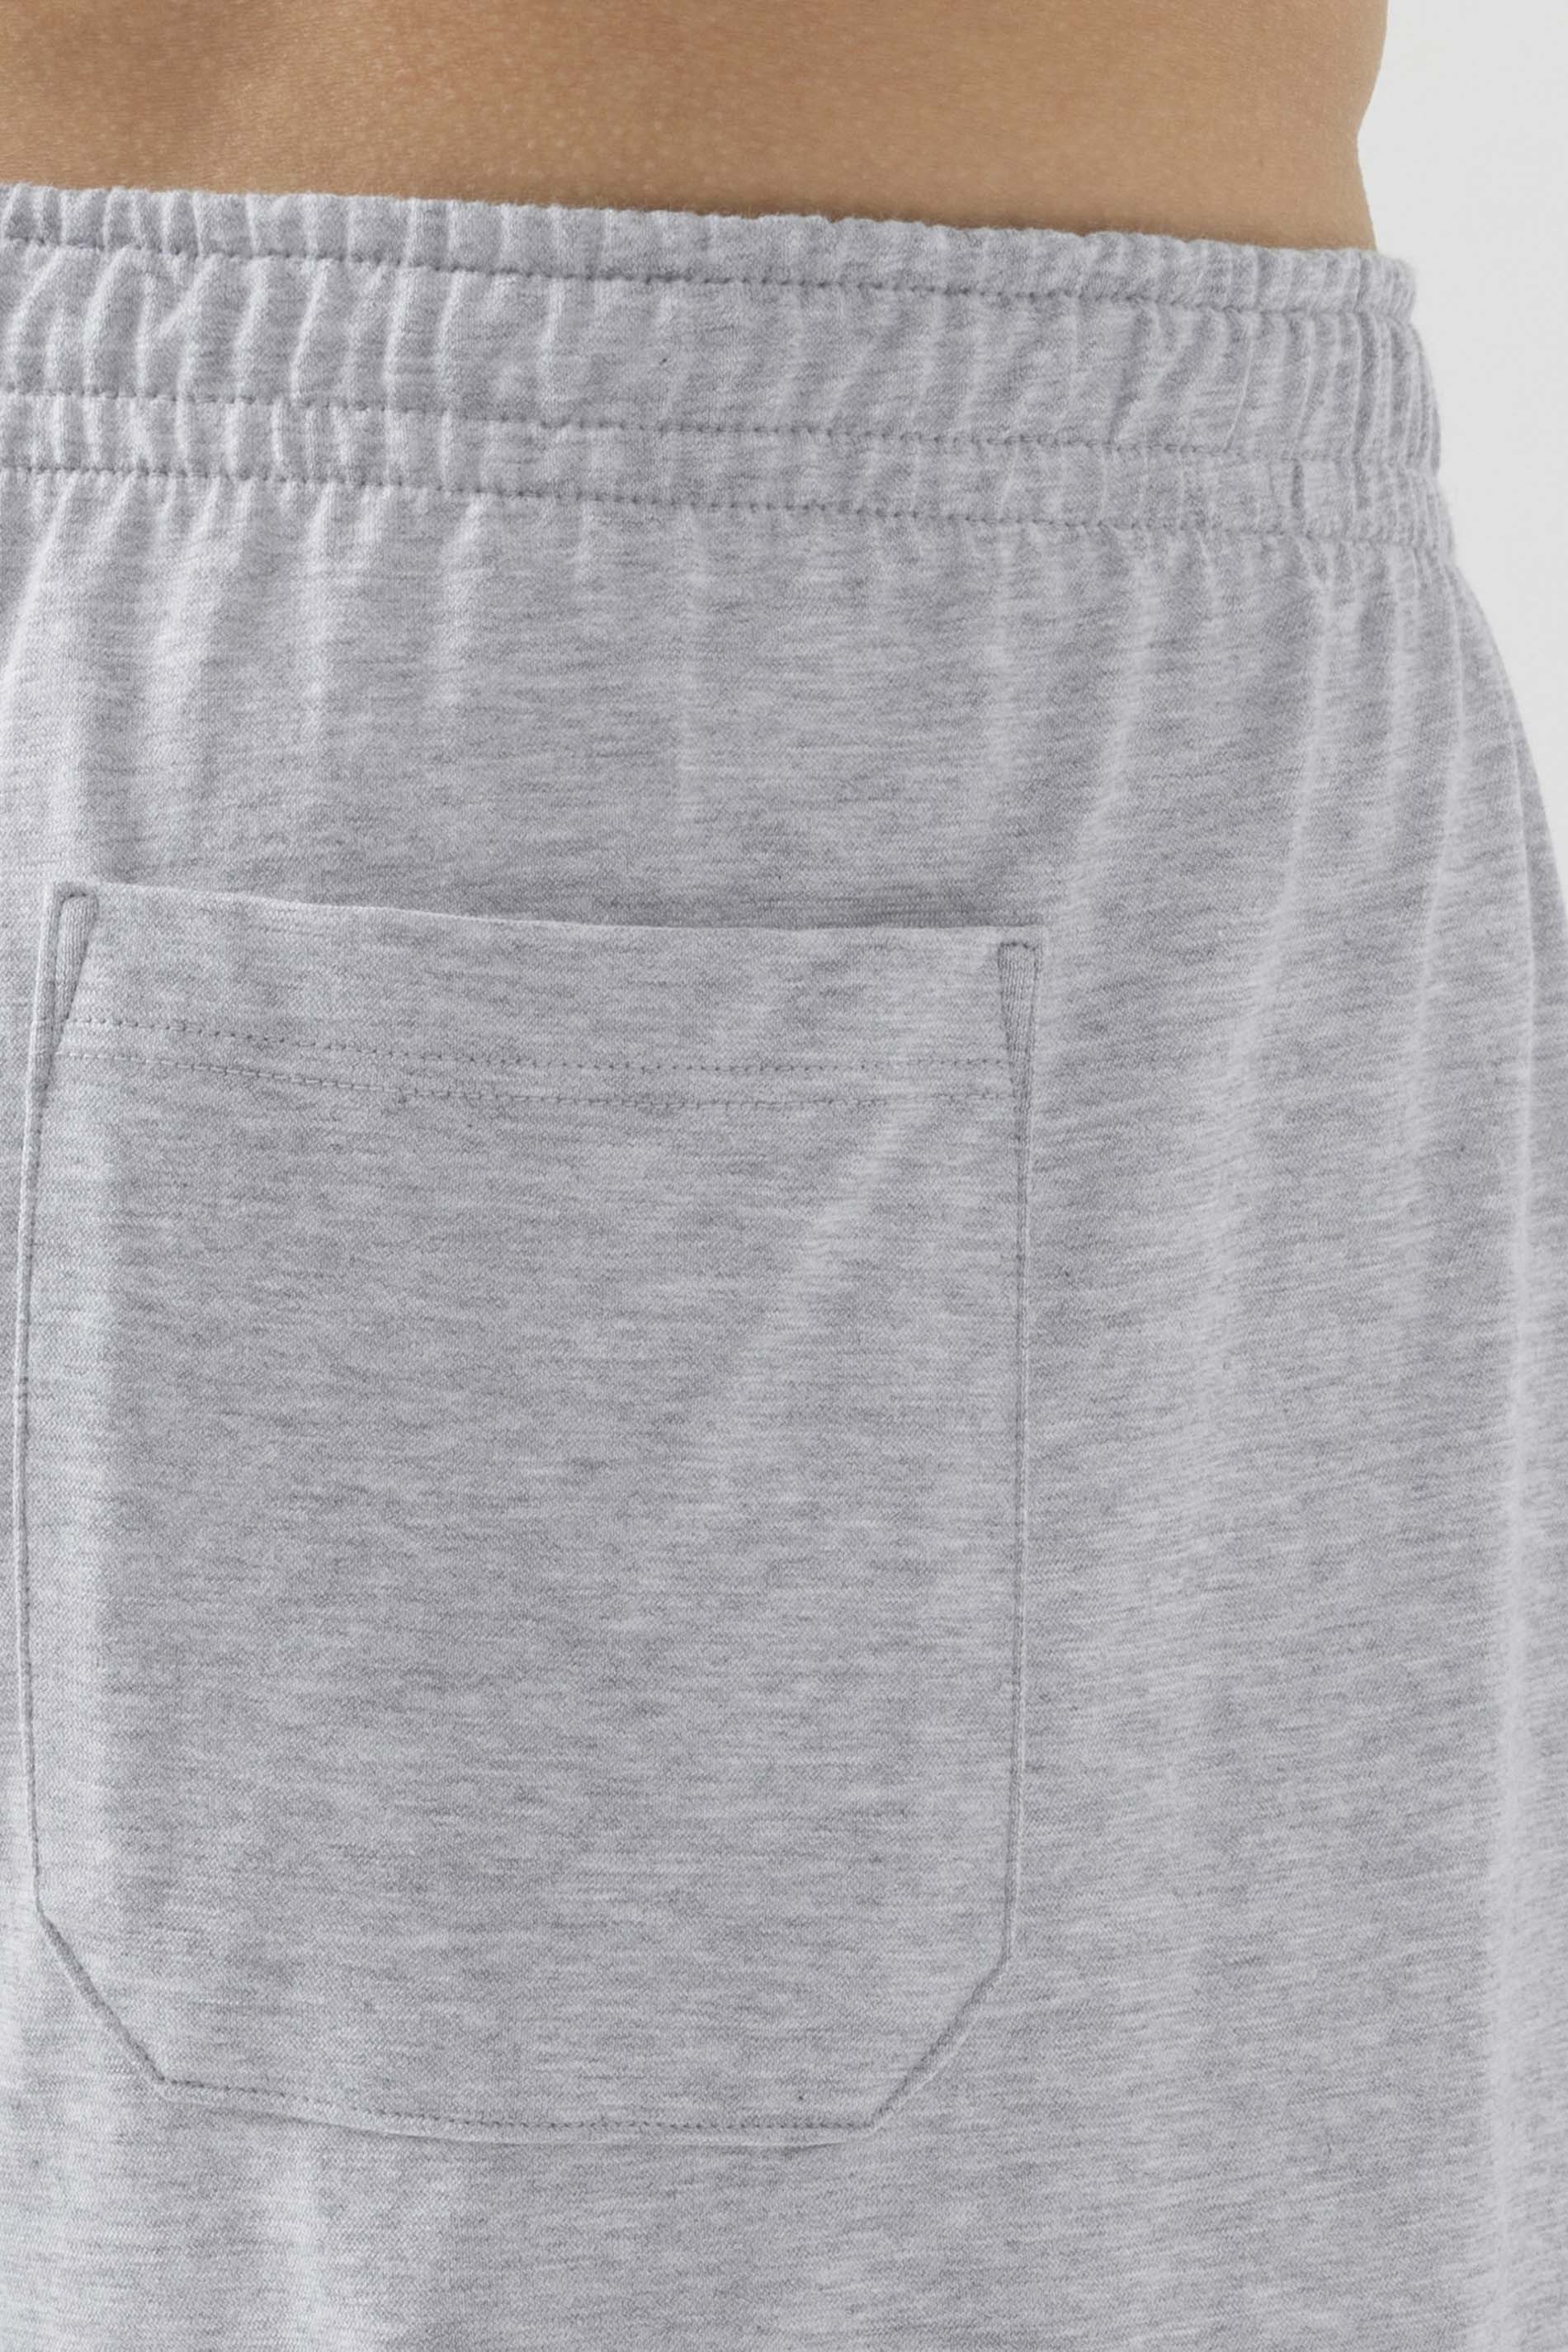 Shorts Serie Ringwood Detail View 02 | mey®